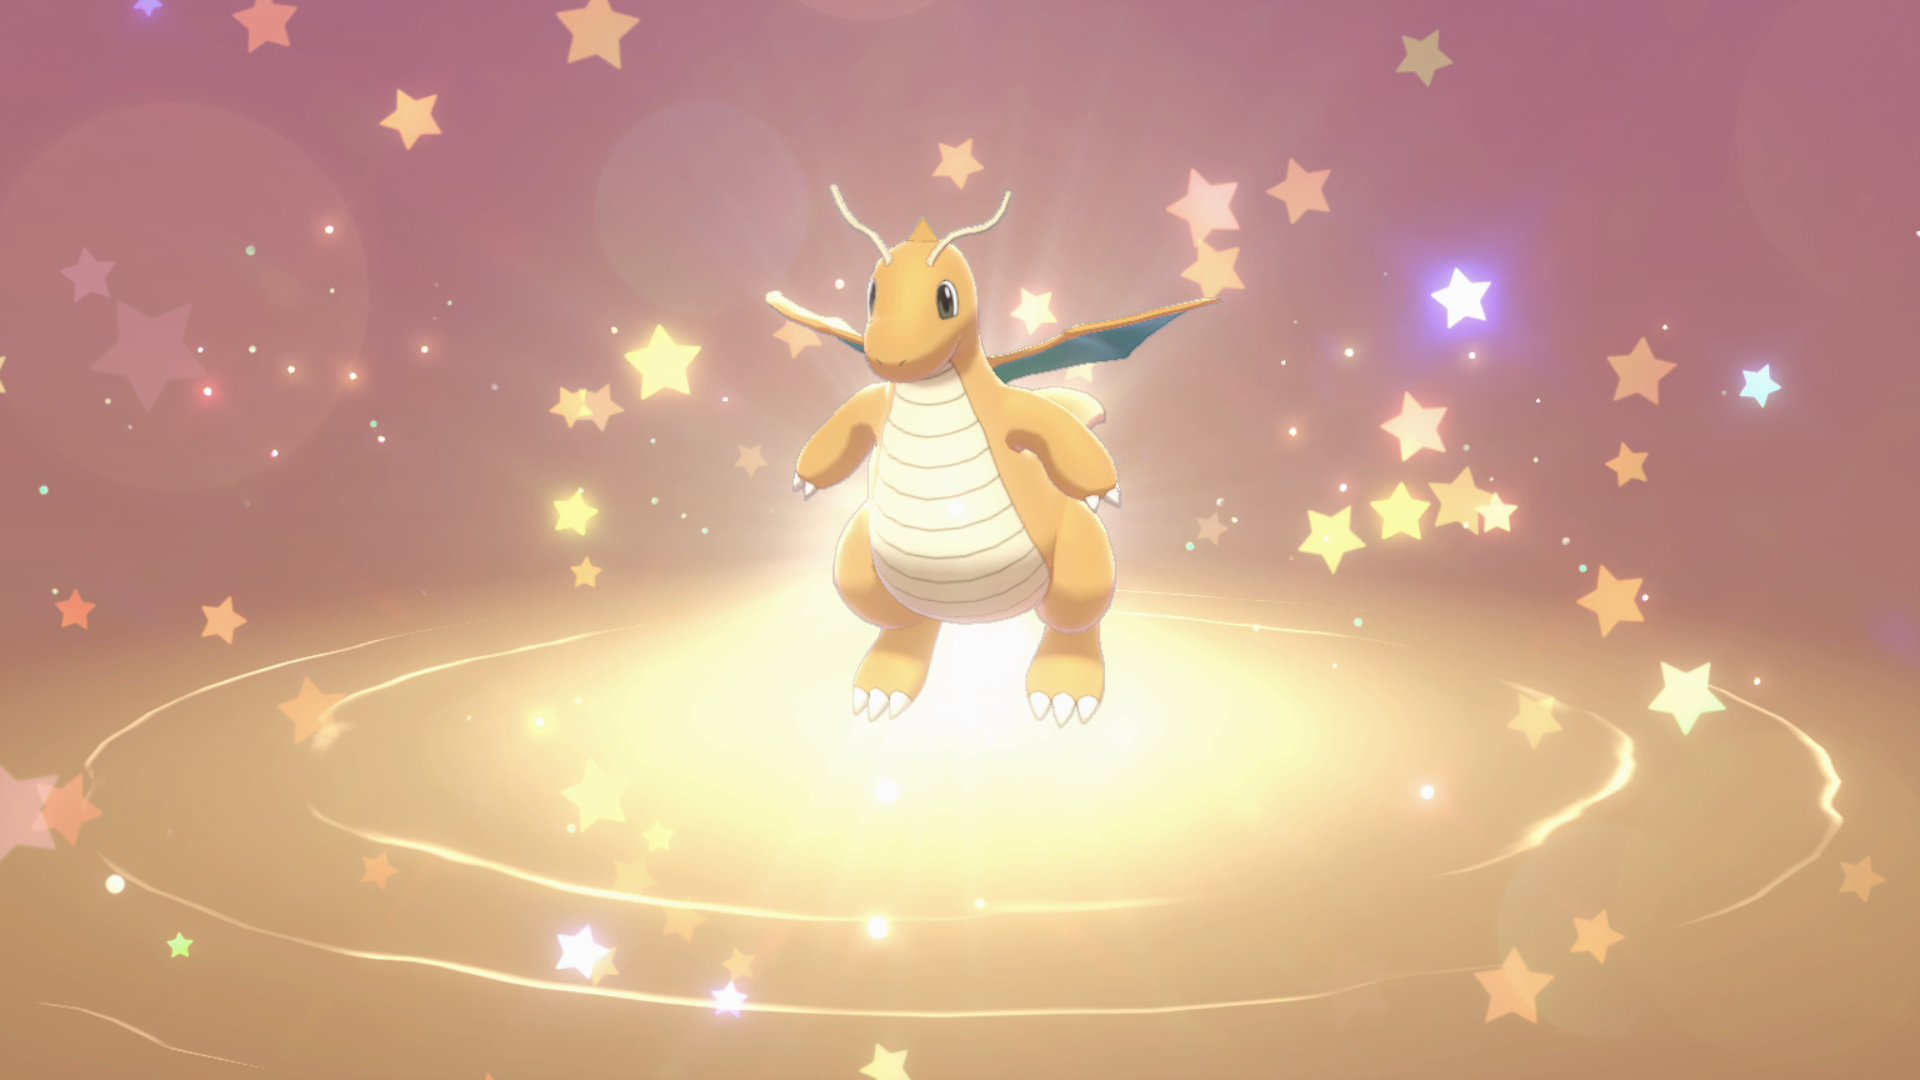 How strong is Ash's Dragonite? - Quora